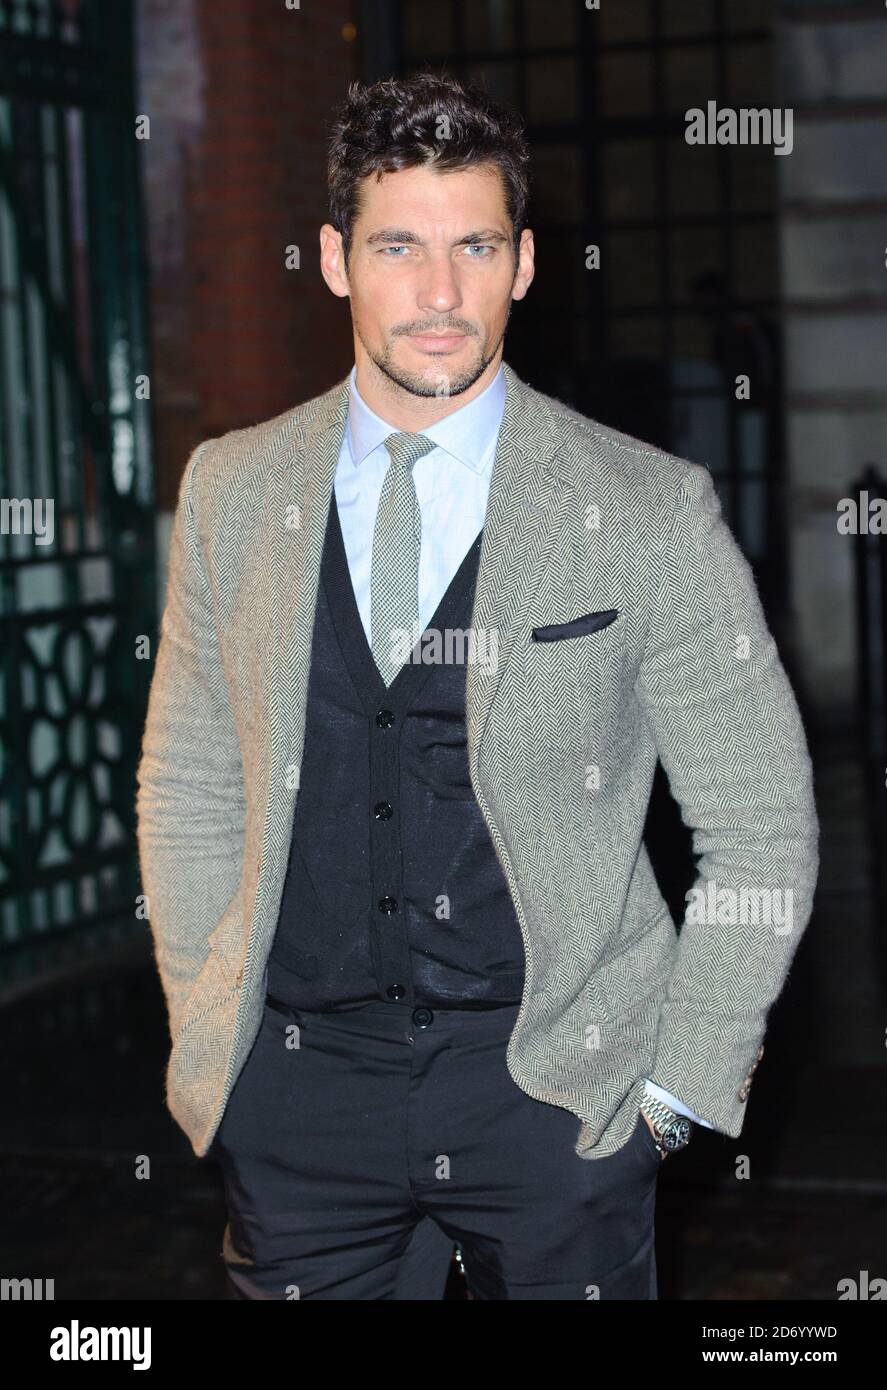 David Gandy attending the The 1000 - London's Most Influential People party, at the London Transport Museum in Covent Garden. Stock Photo